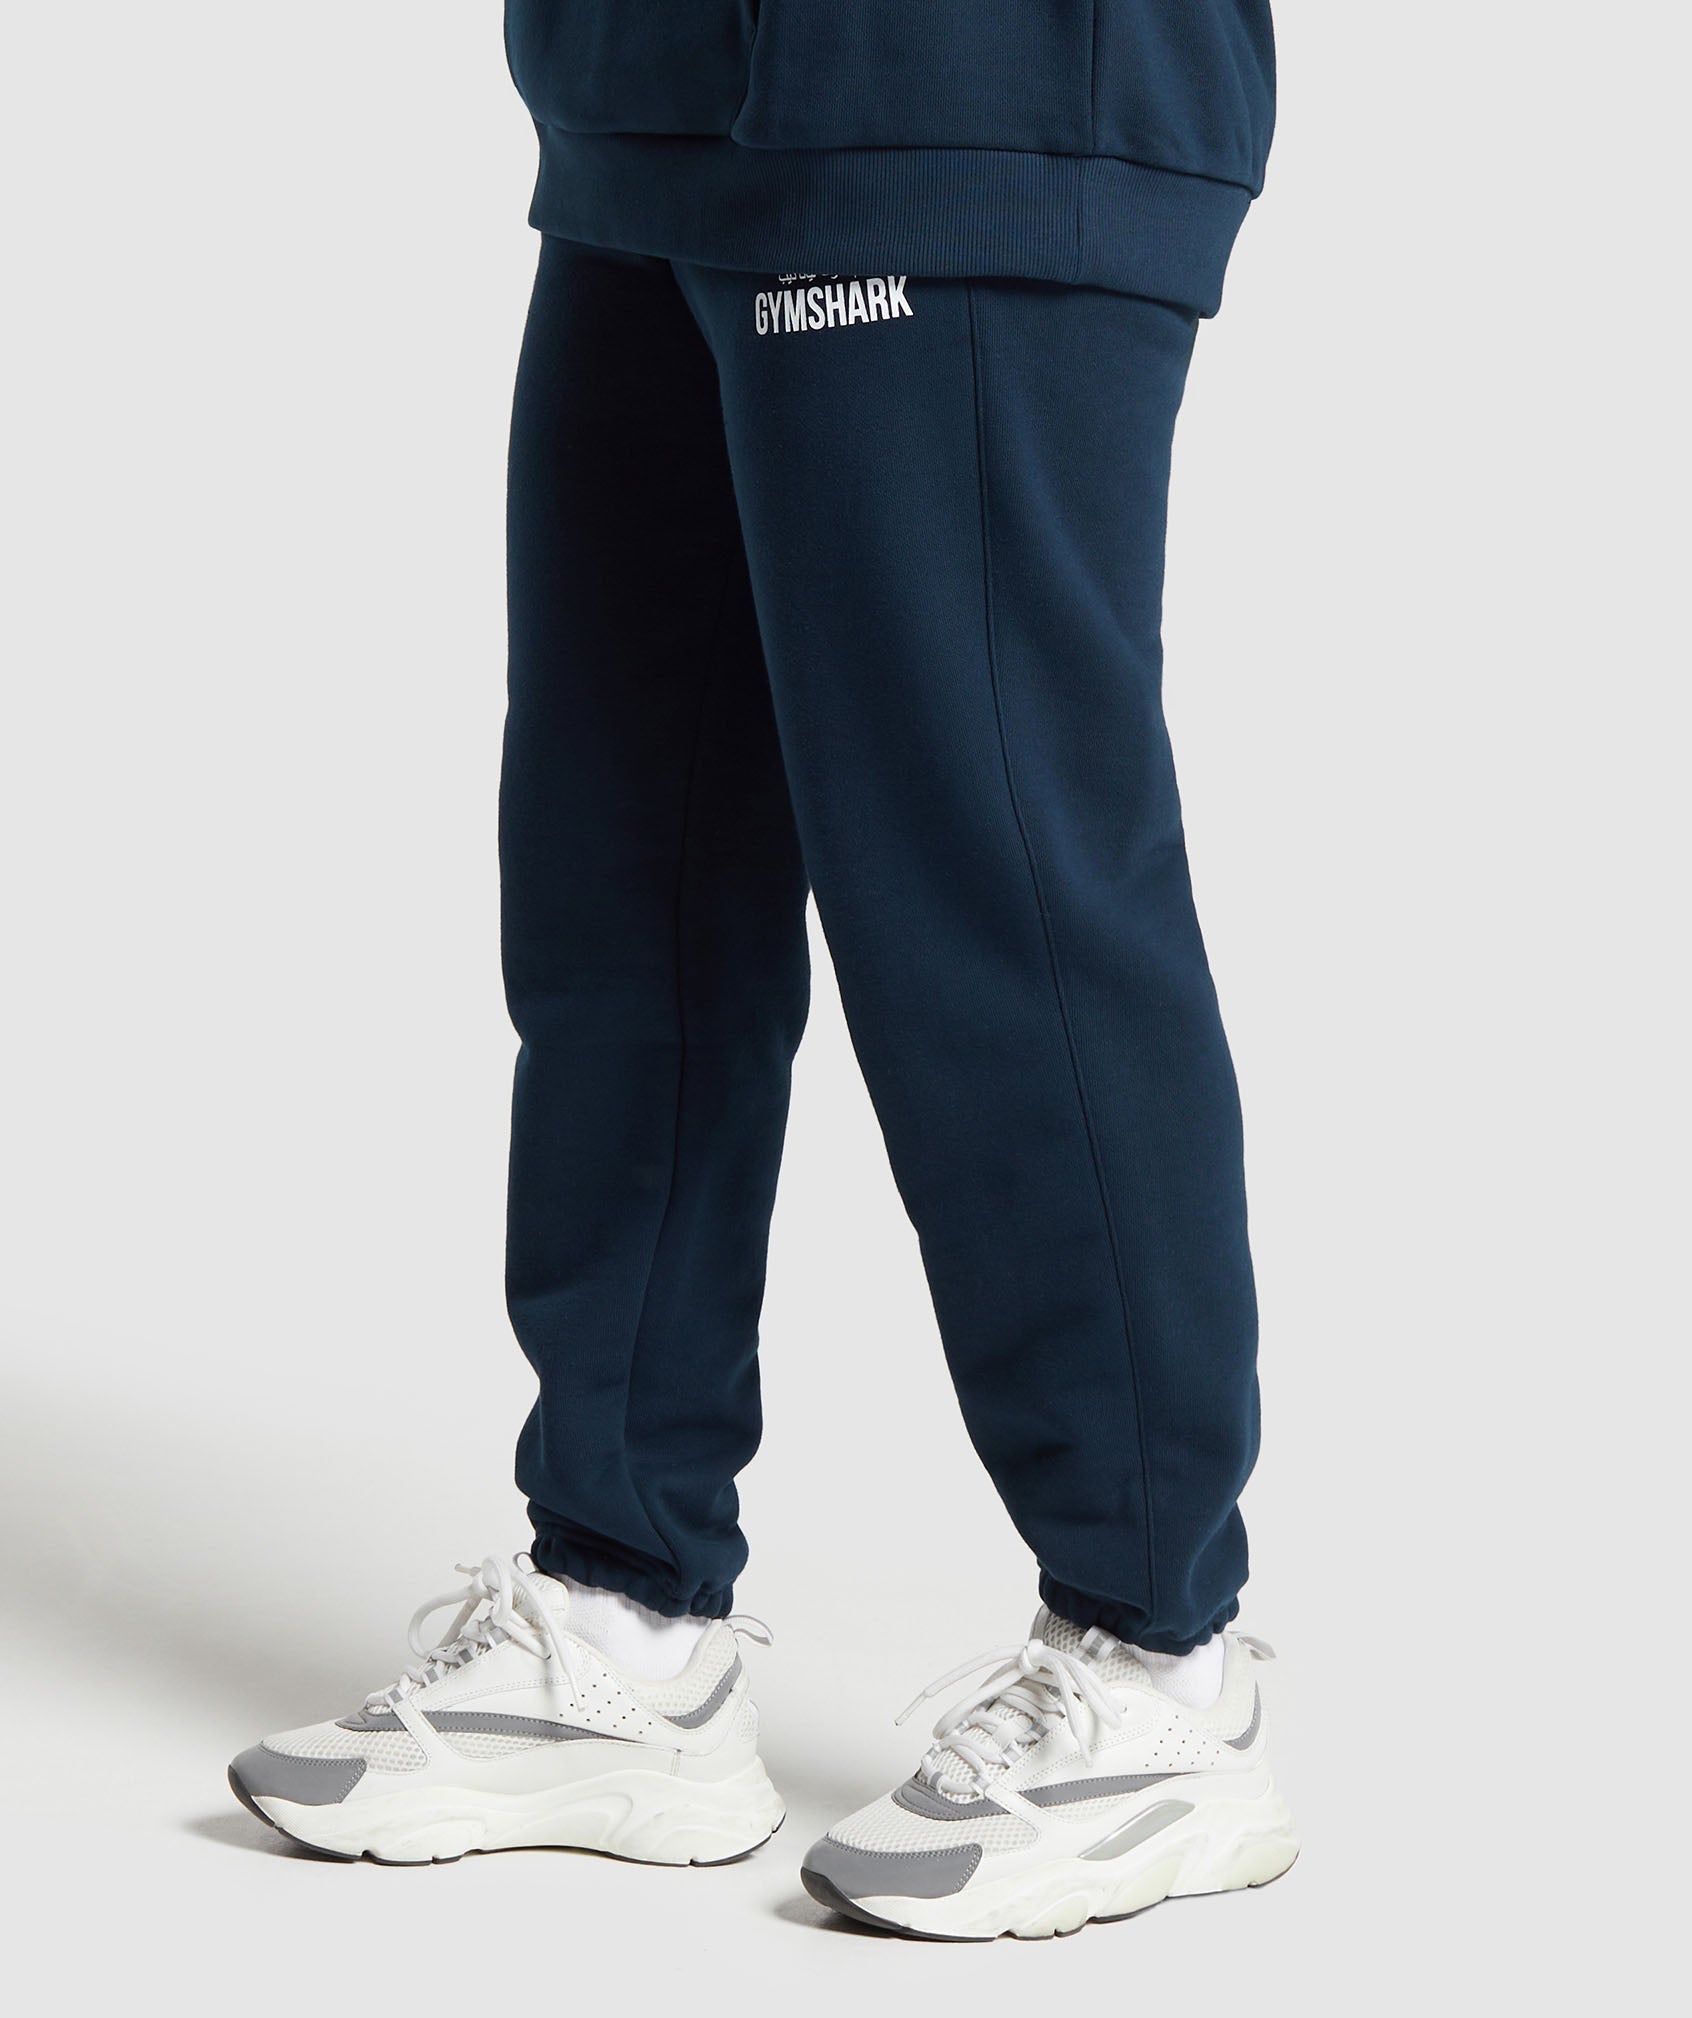 GS X Leana Deeb Oversized Joggers in Navy - view 3